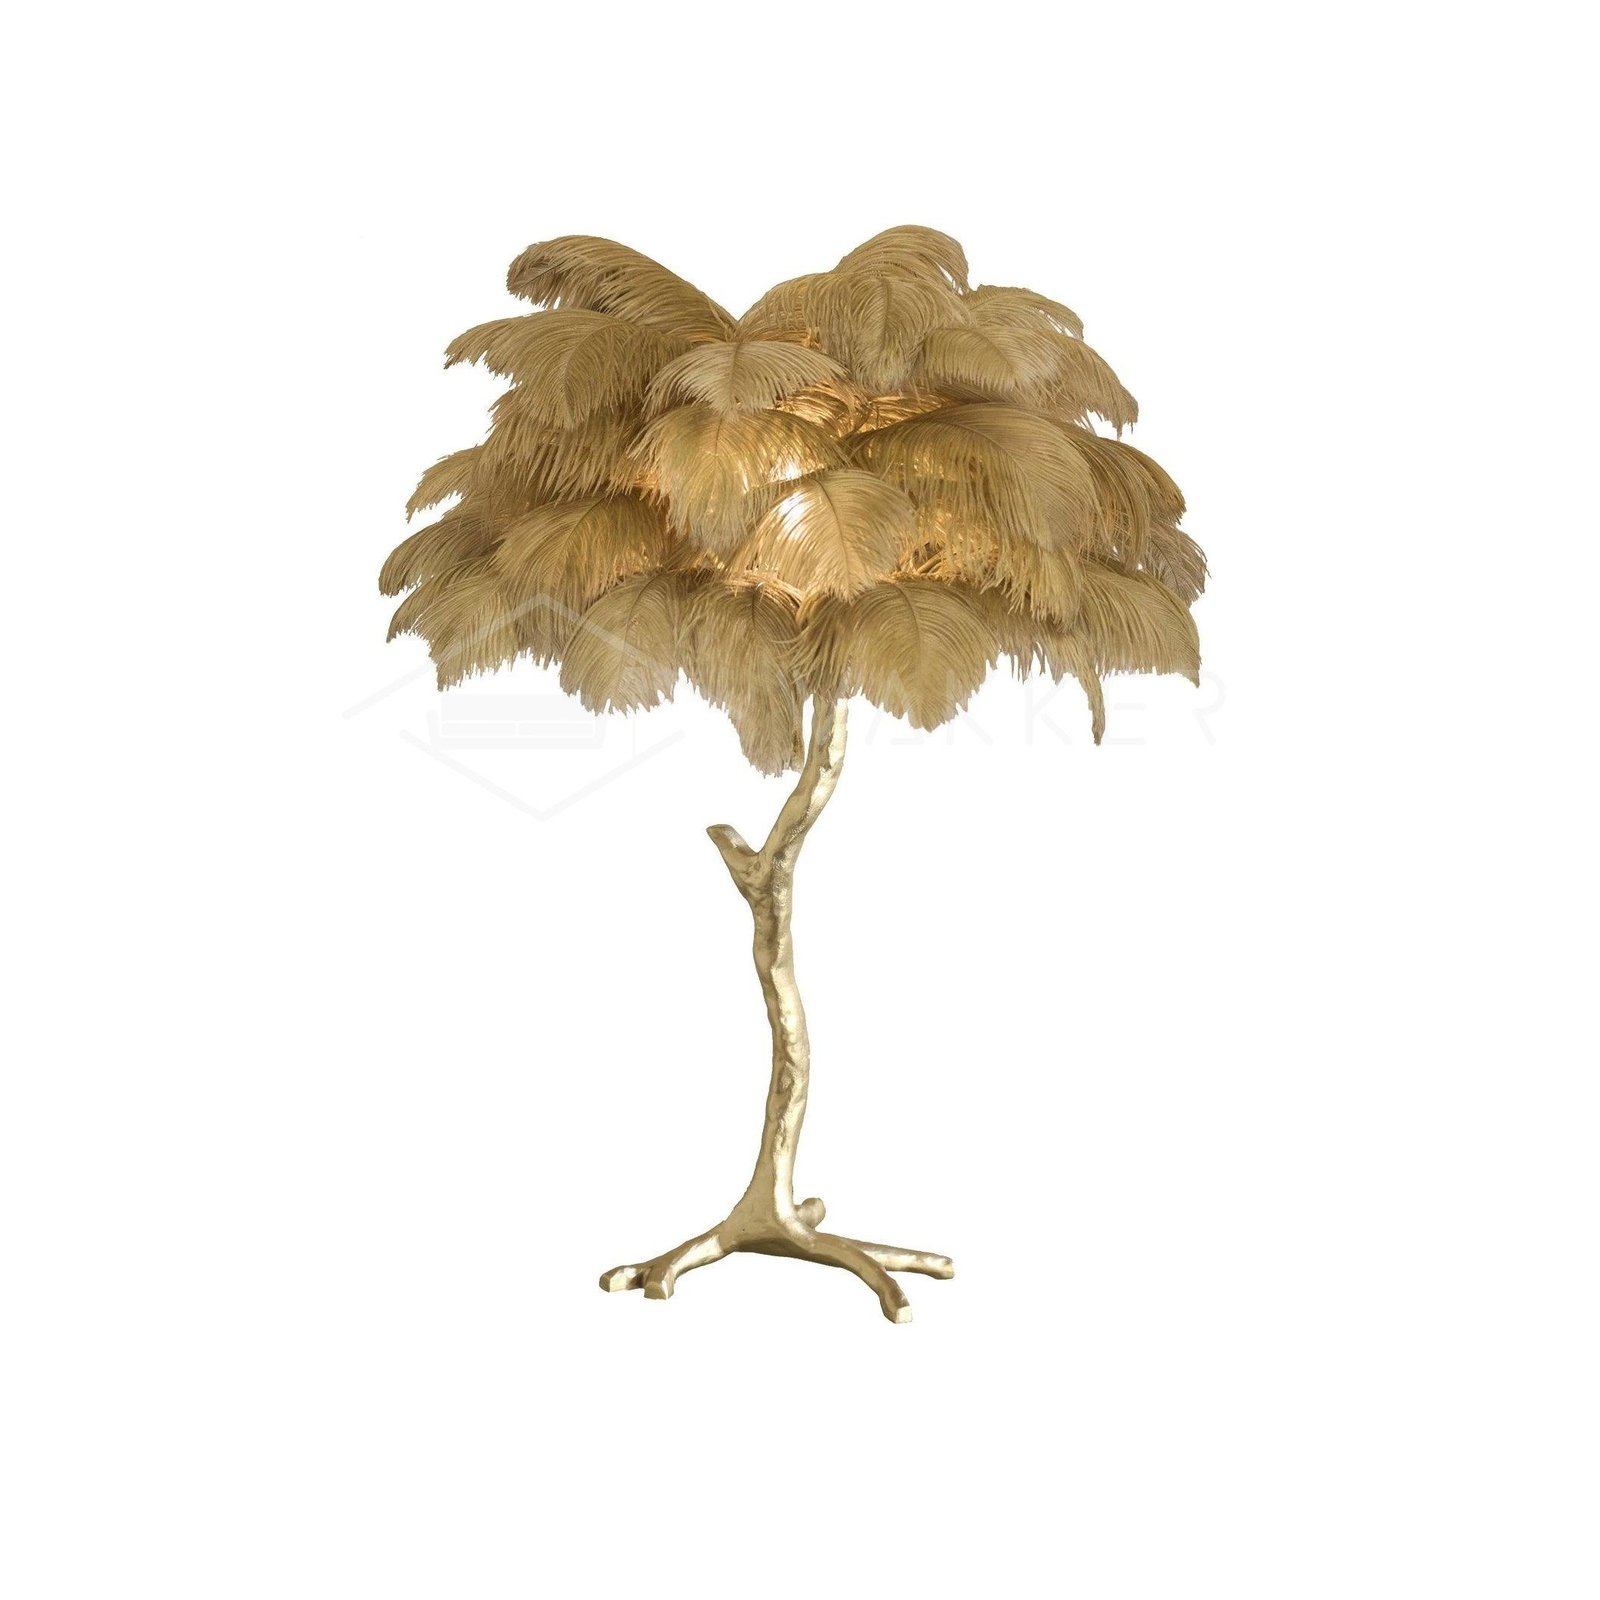 Ostrich Feather Shade Table Lamp: 29.5" Diameter and Height, Polished Brass in Elegant Old Gold Color, 75cm Diameter and Height